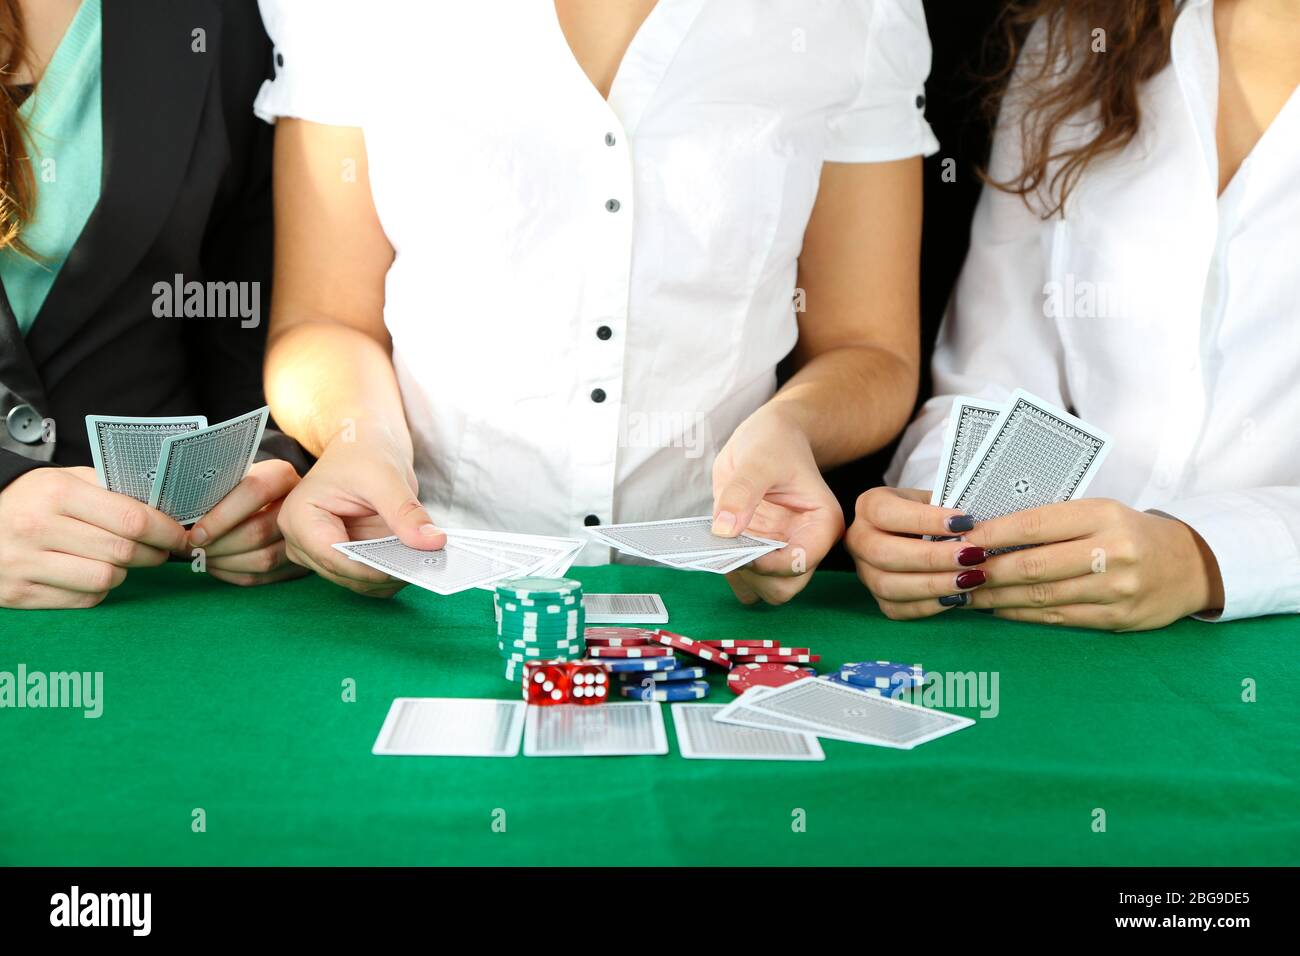 People playing cards at table Stock Photo